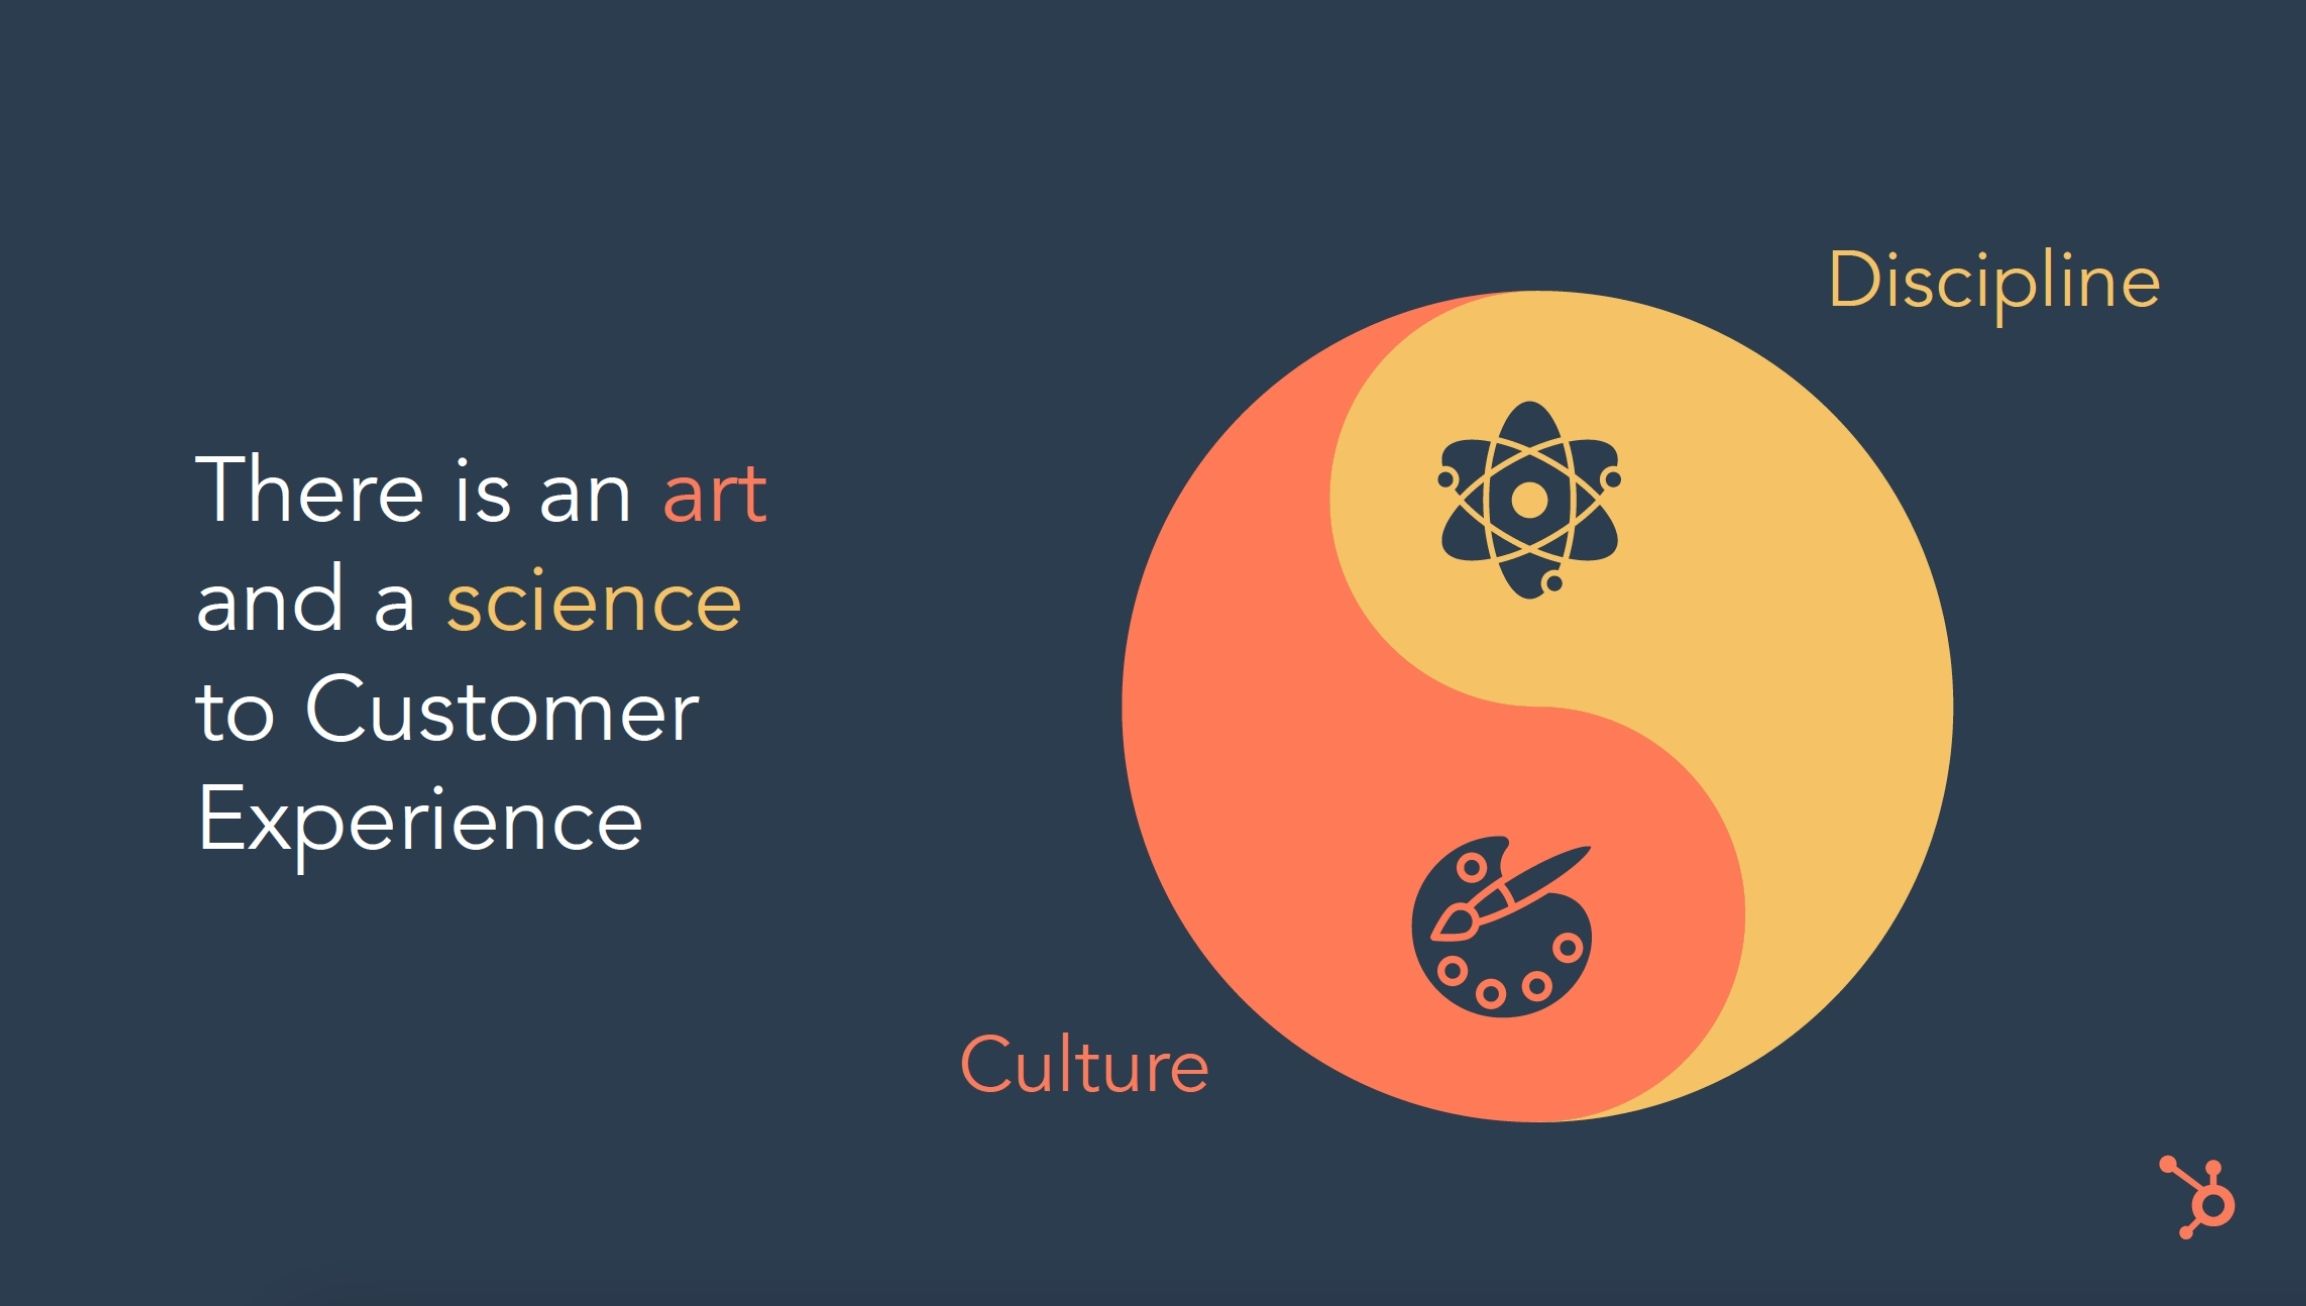 Video: The Art and Science of Customer Experience with HubSpot